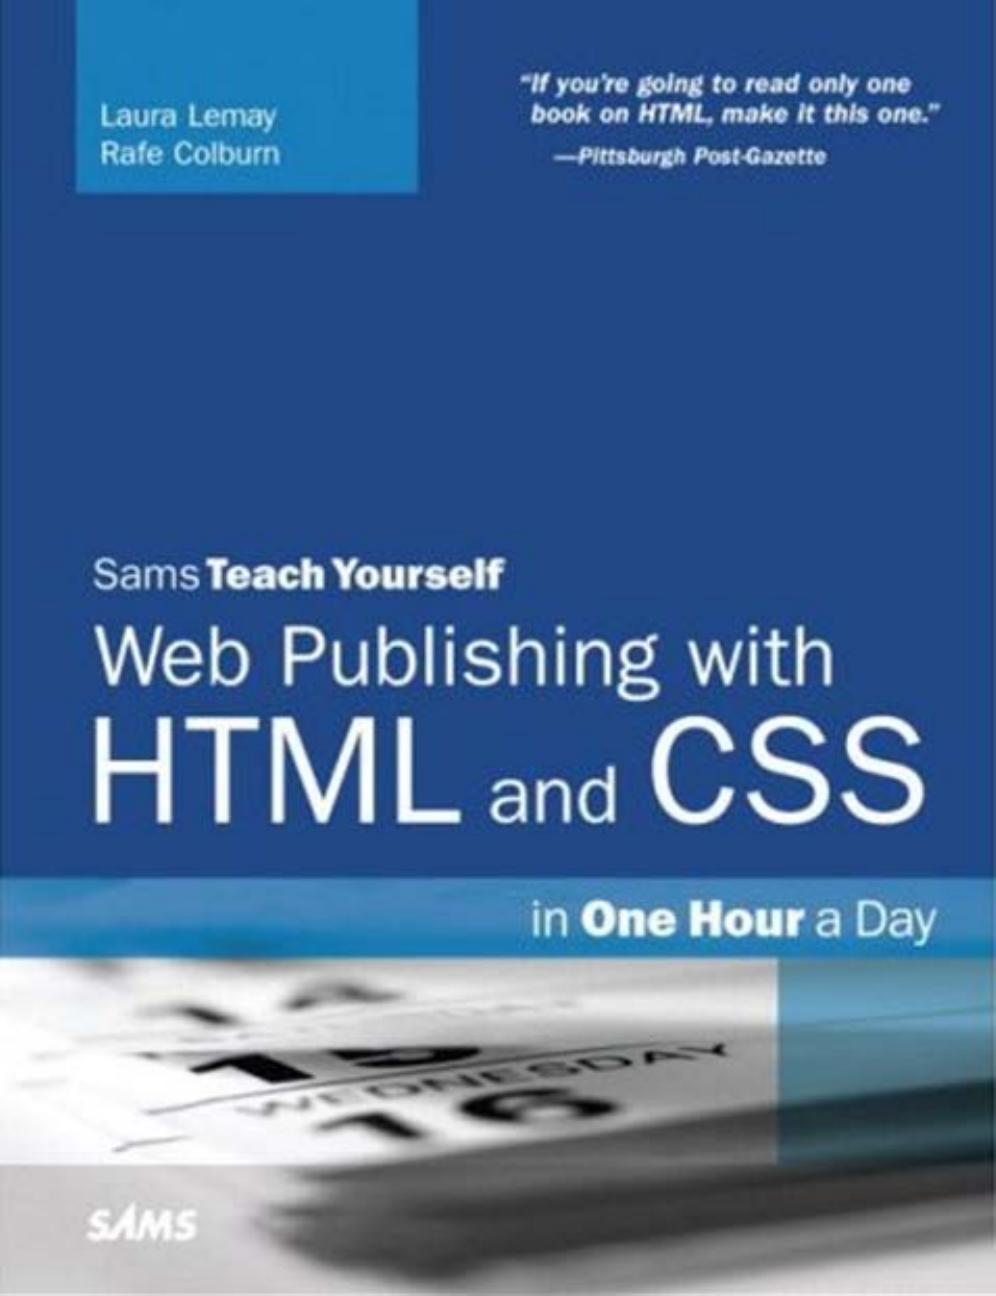 Sams Teach Yourself: Web Publishing with HTML and CSS in One Hour a Day by Laura Lemay Rafe Colburn